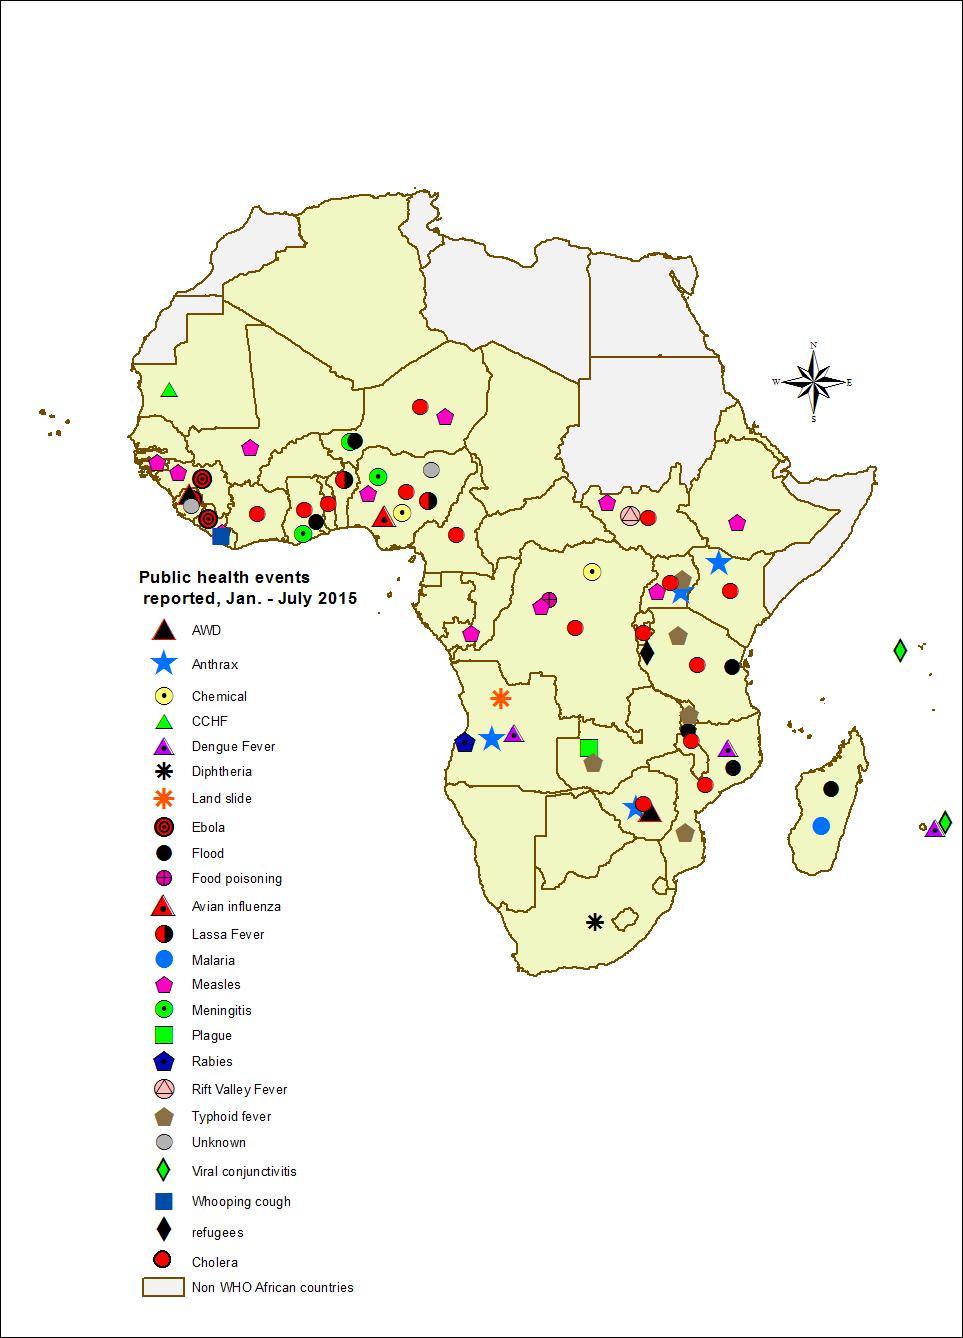 Public Health Events reported in the WHO African Region (Situa+on as of July 2015) q According to data received from the Early Warning System through the Event Management System (EMS), 70 public